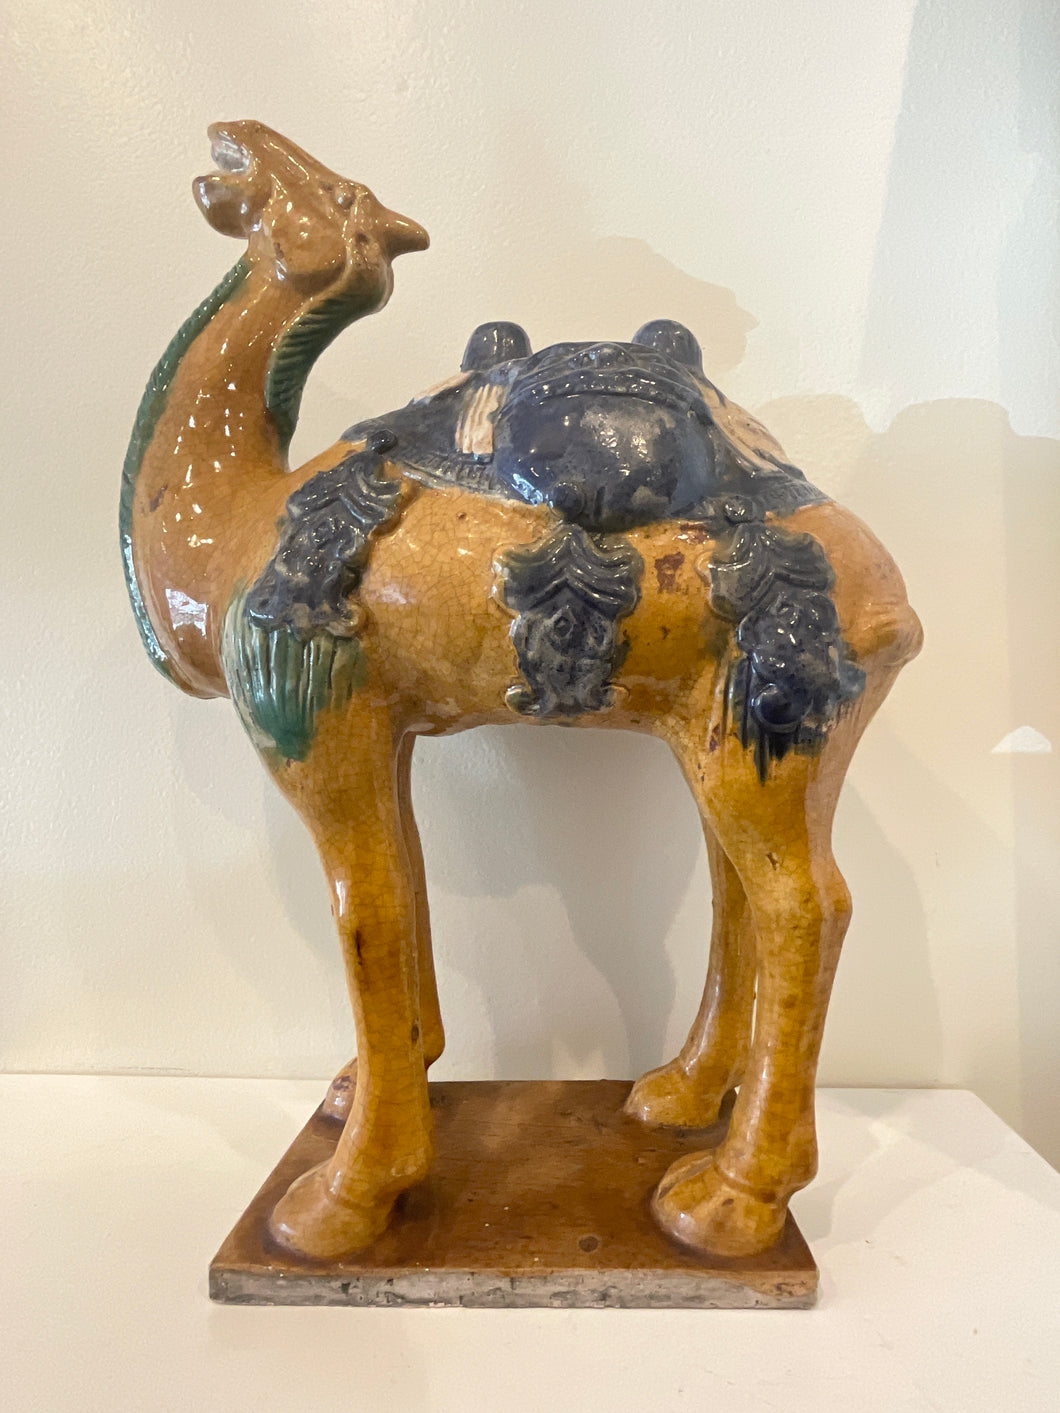 Chinese Porcelain Camel Figure 15” Tall